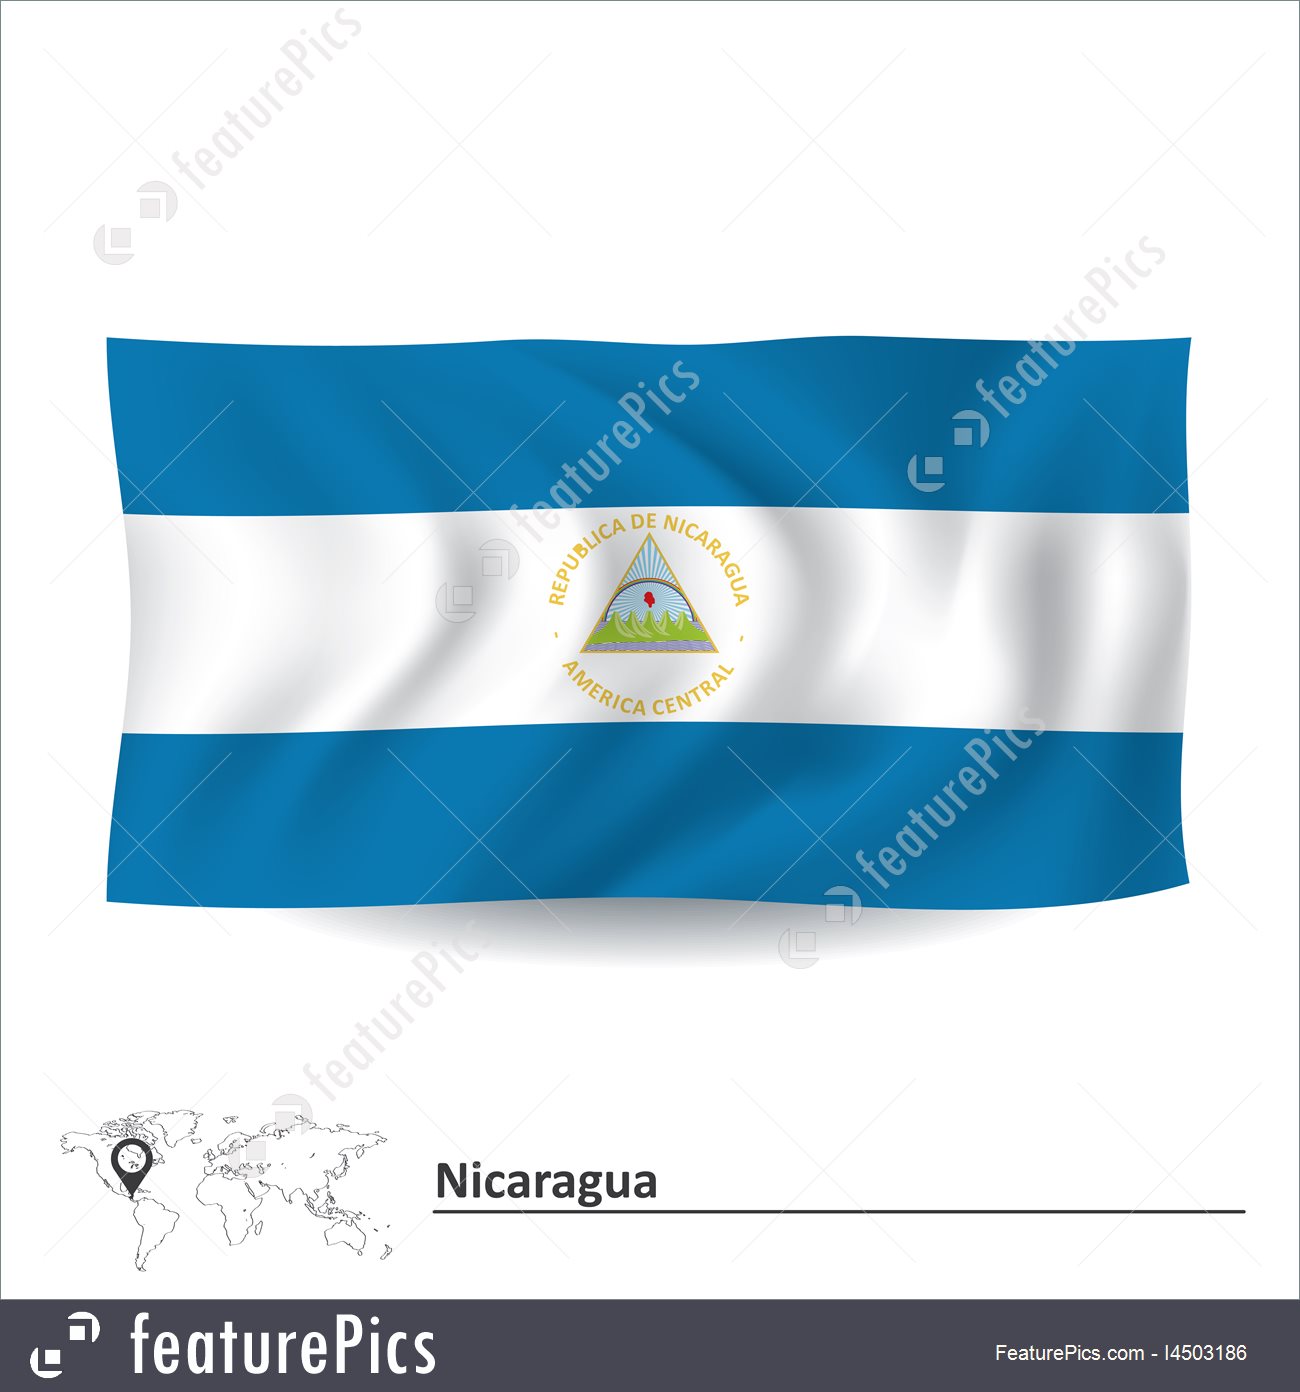 Nicaragua Vector at Vectorified.com | Collection of Nicaragua Vector ...